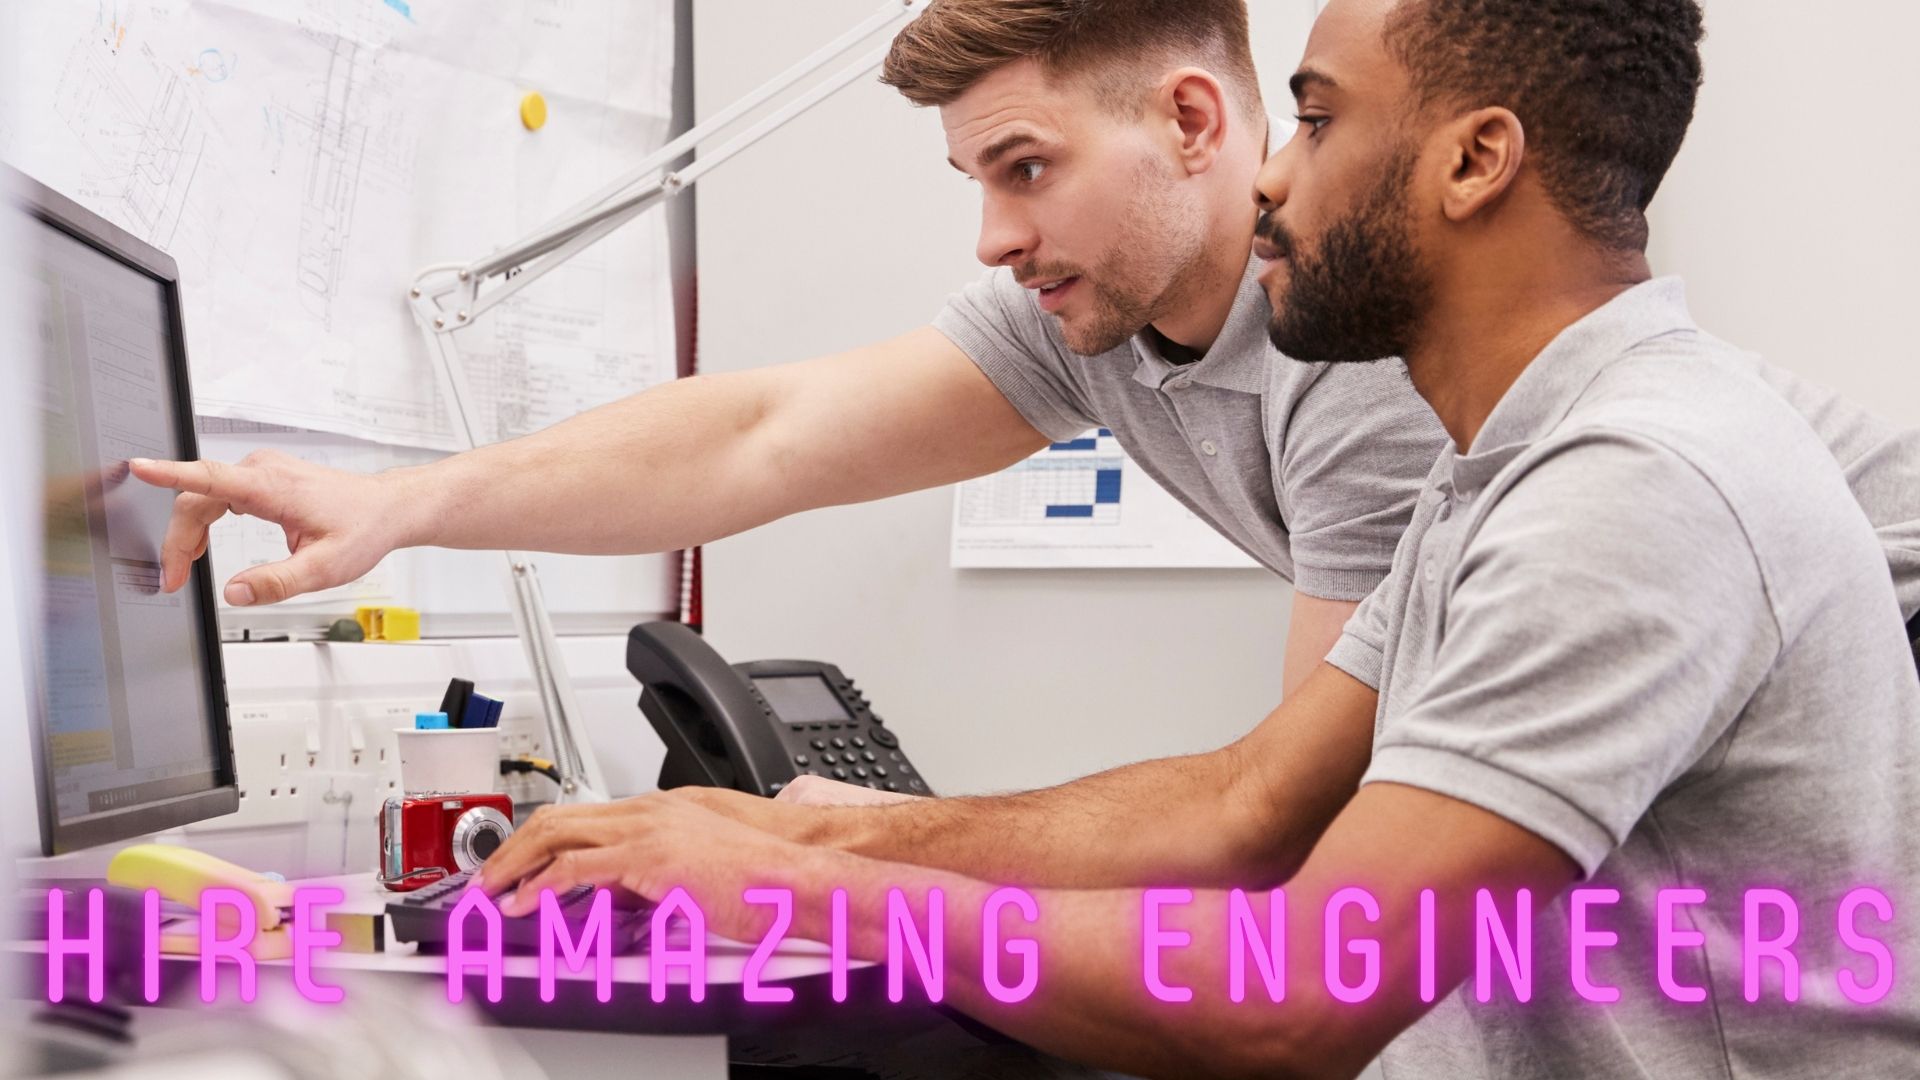 5 Tips for Recruiting Top Engineering Talent in Startups